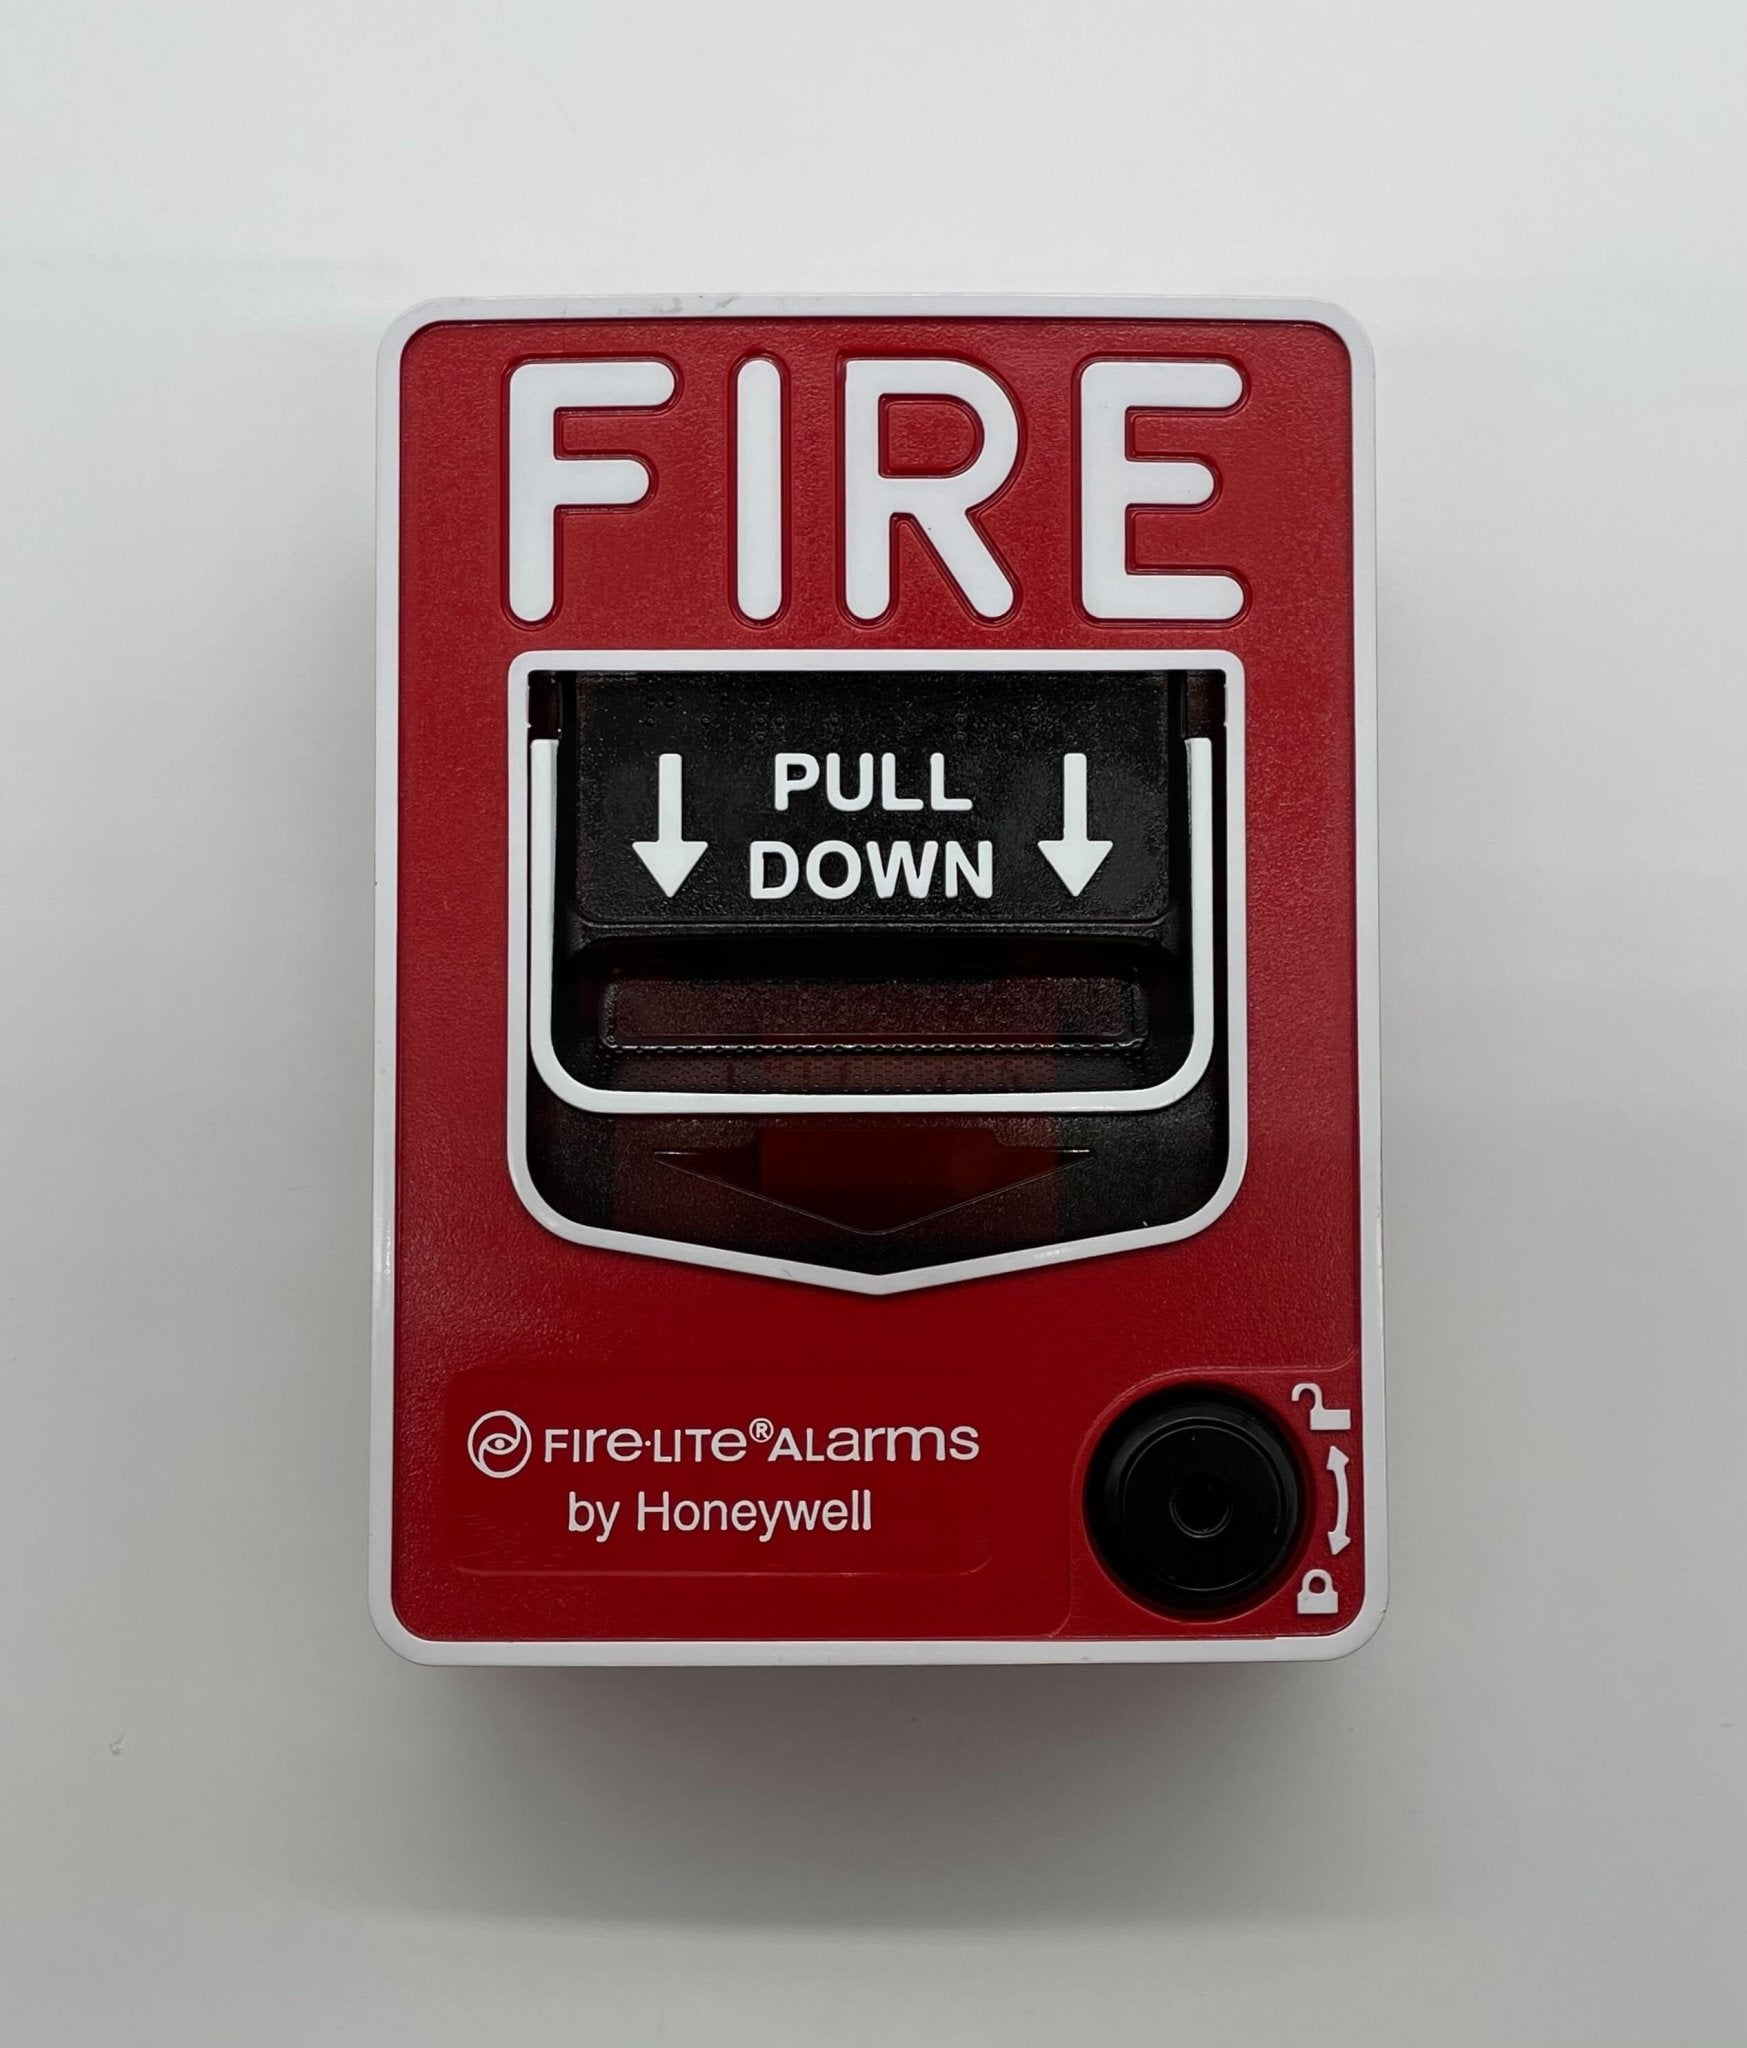 Firelite BG-12S Single-Action Pull Station with Pigtail Connections - The Fire Alarm Supplier